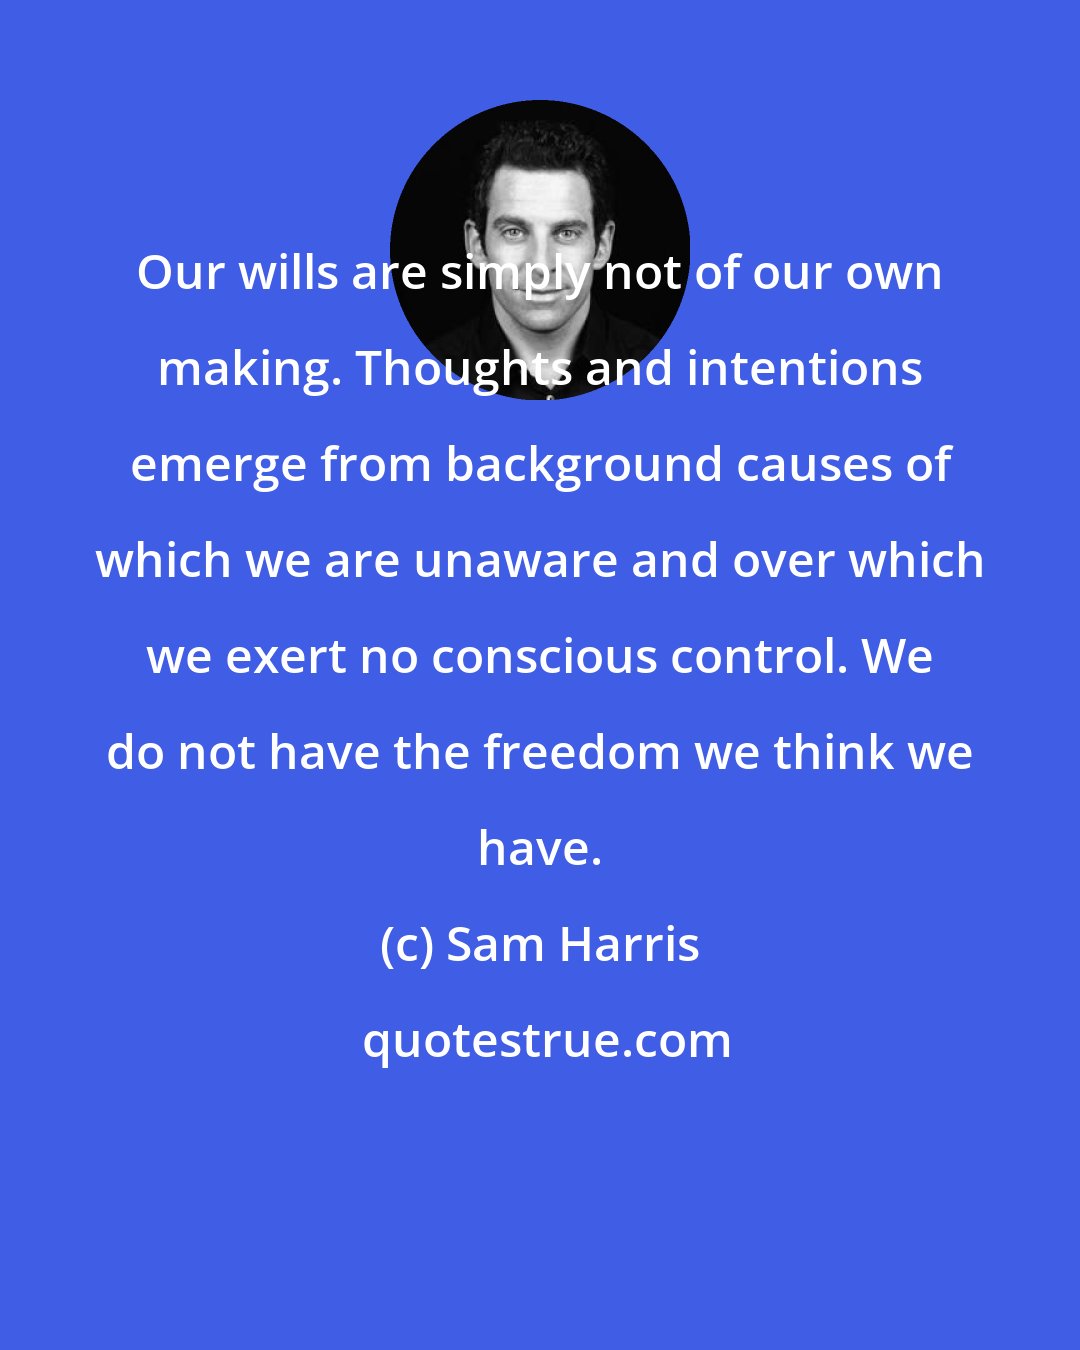 Sam Harris: Our wills are simply not of our own making. Thoughts and intentions emerge from background causes of which we are unaware and over which we exert no conscious control. We do not have the freedom we think we have.